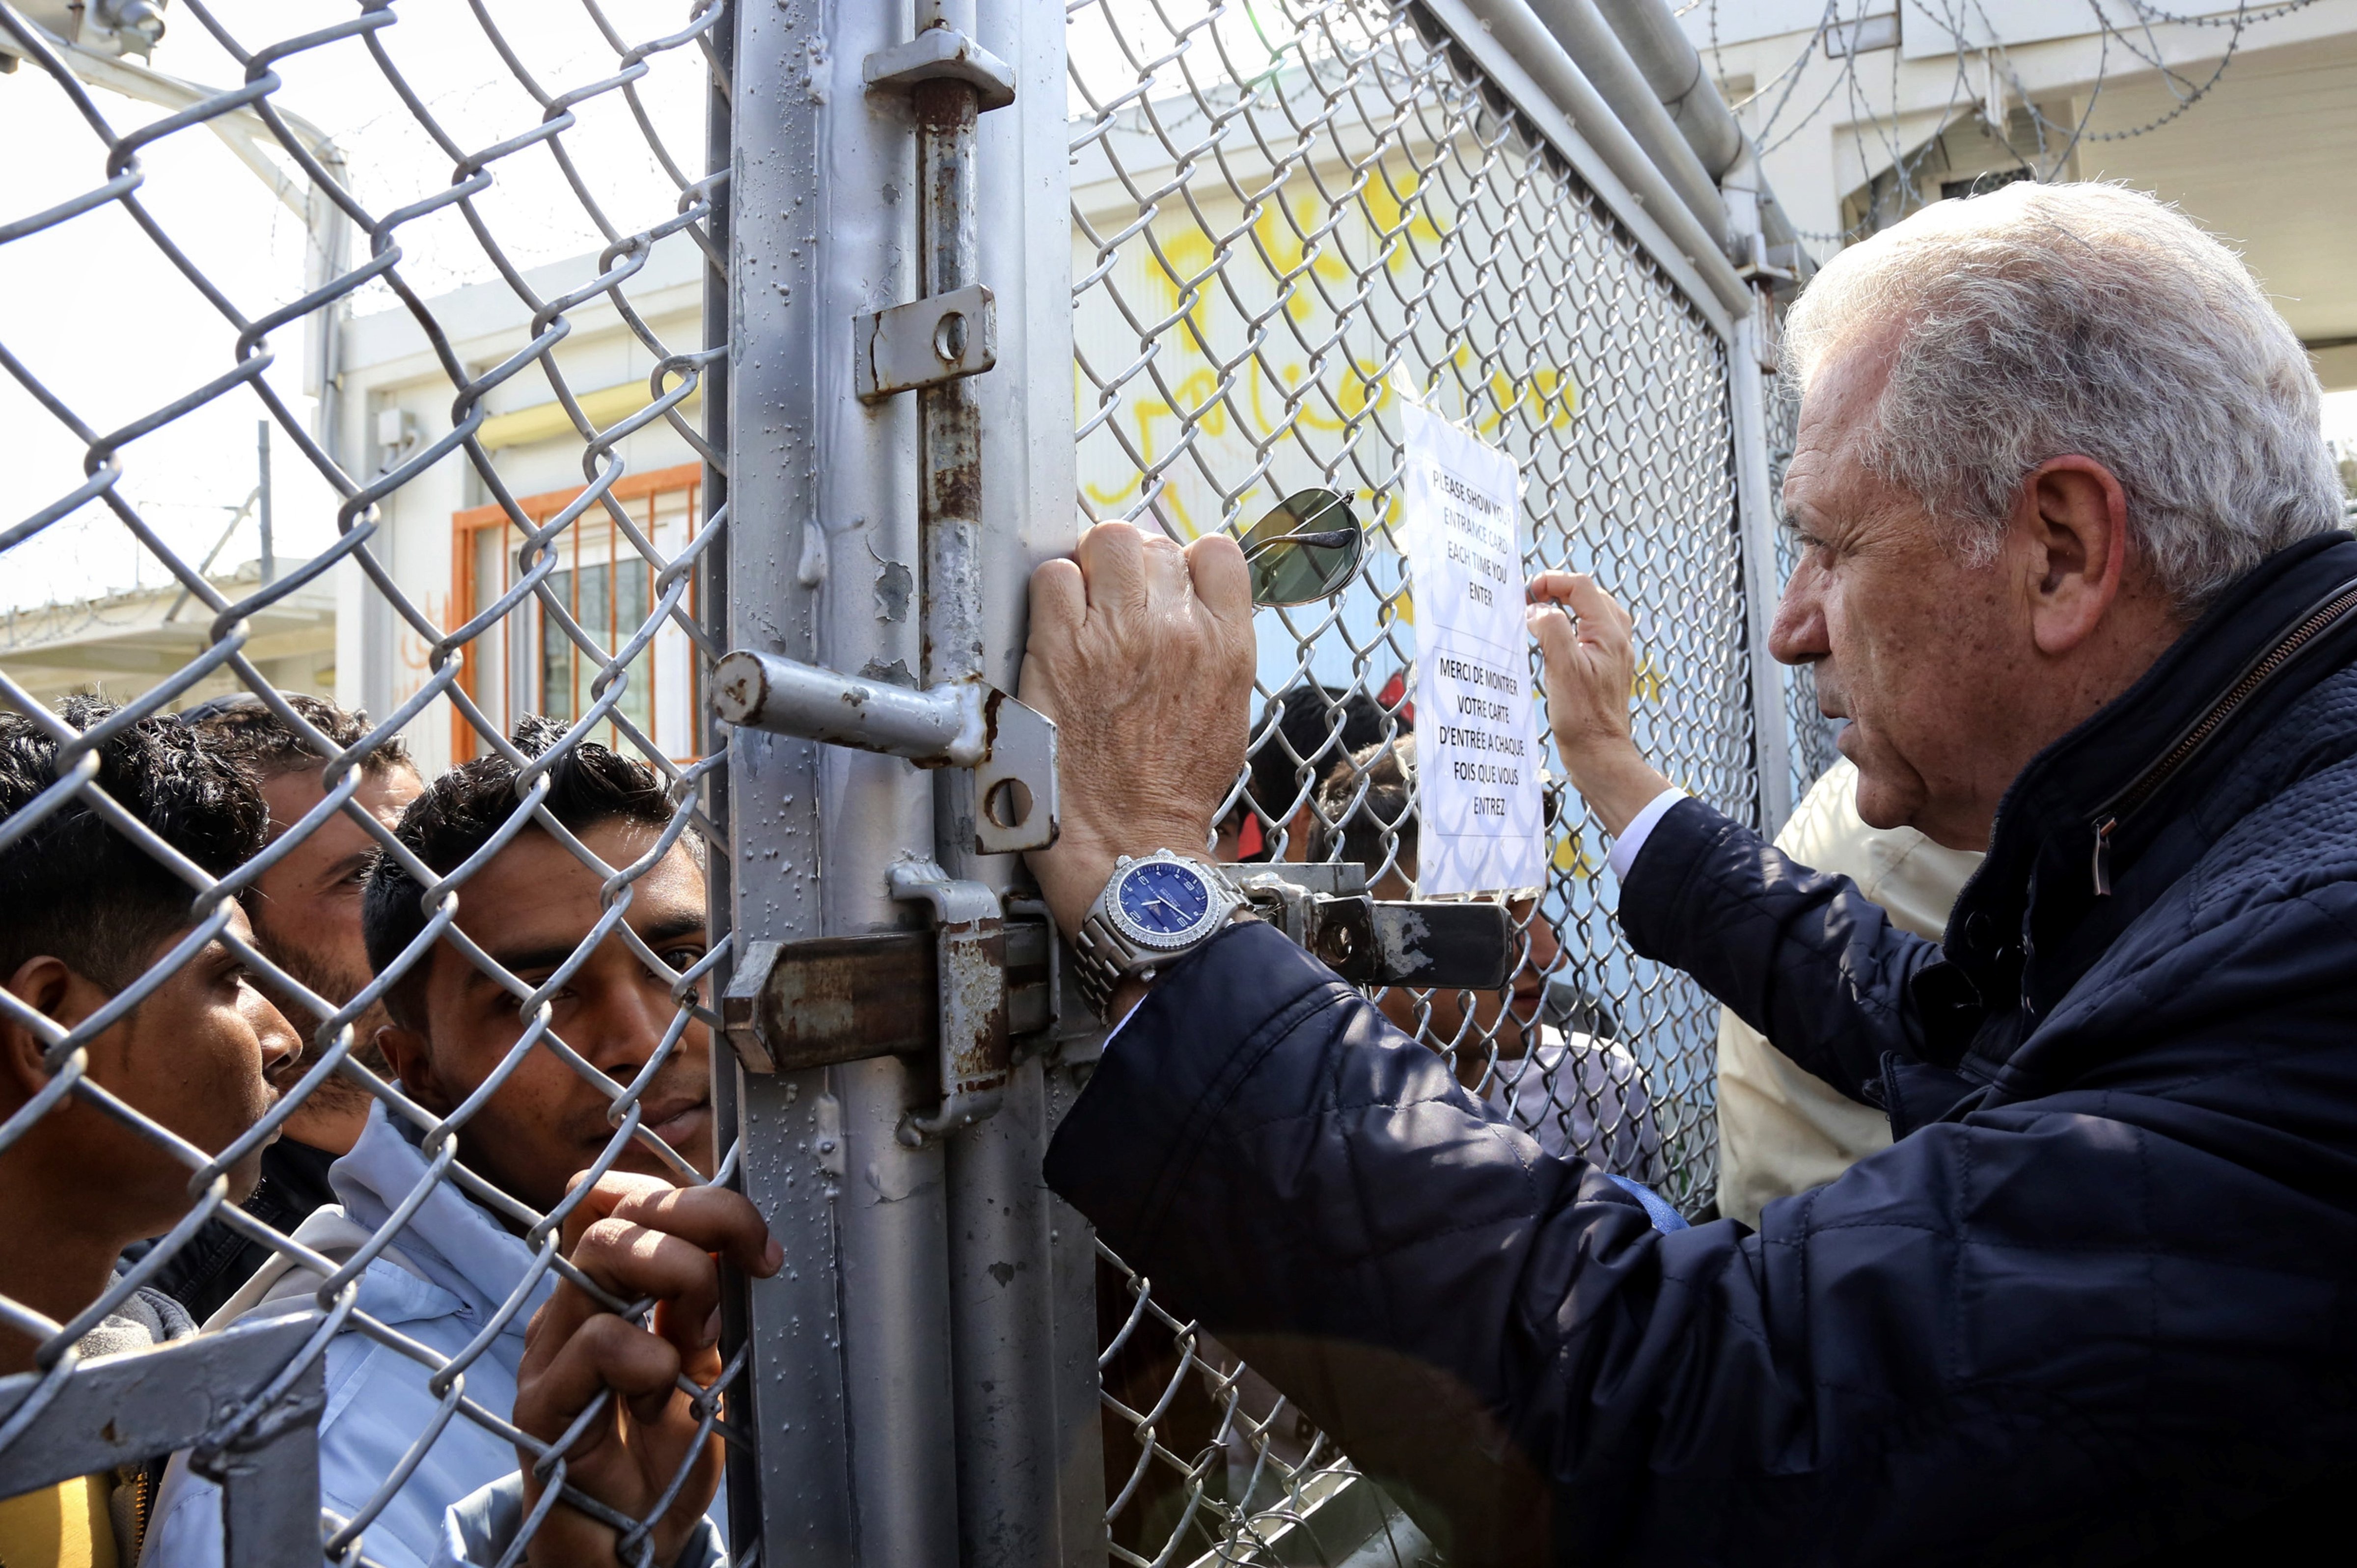 E.U. Migration Commissioner Dimitris Avramopoulos talks with migrants  during his visit to the  Moria migrant camp on March 16, 2017 on the island of Lesbos, almost a year after an EU-Turkey deal.